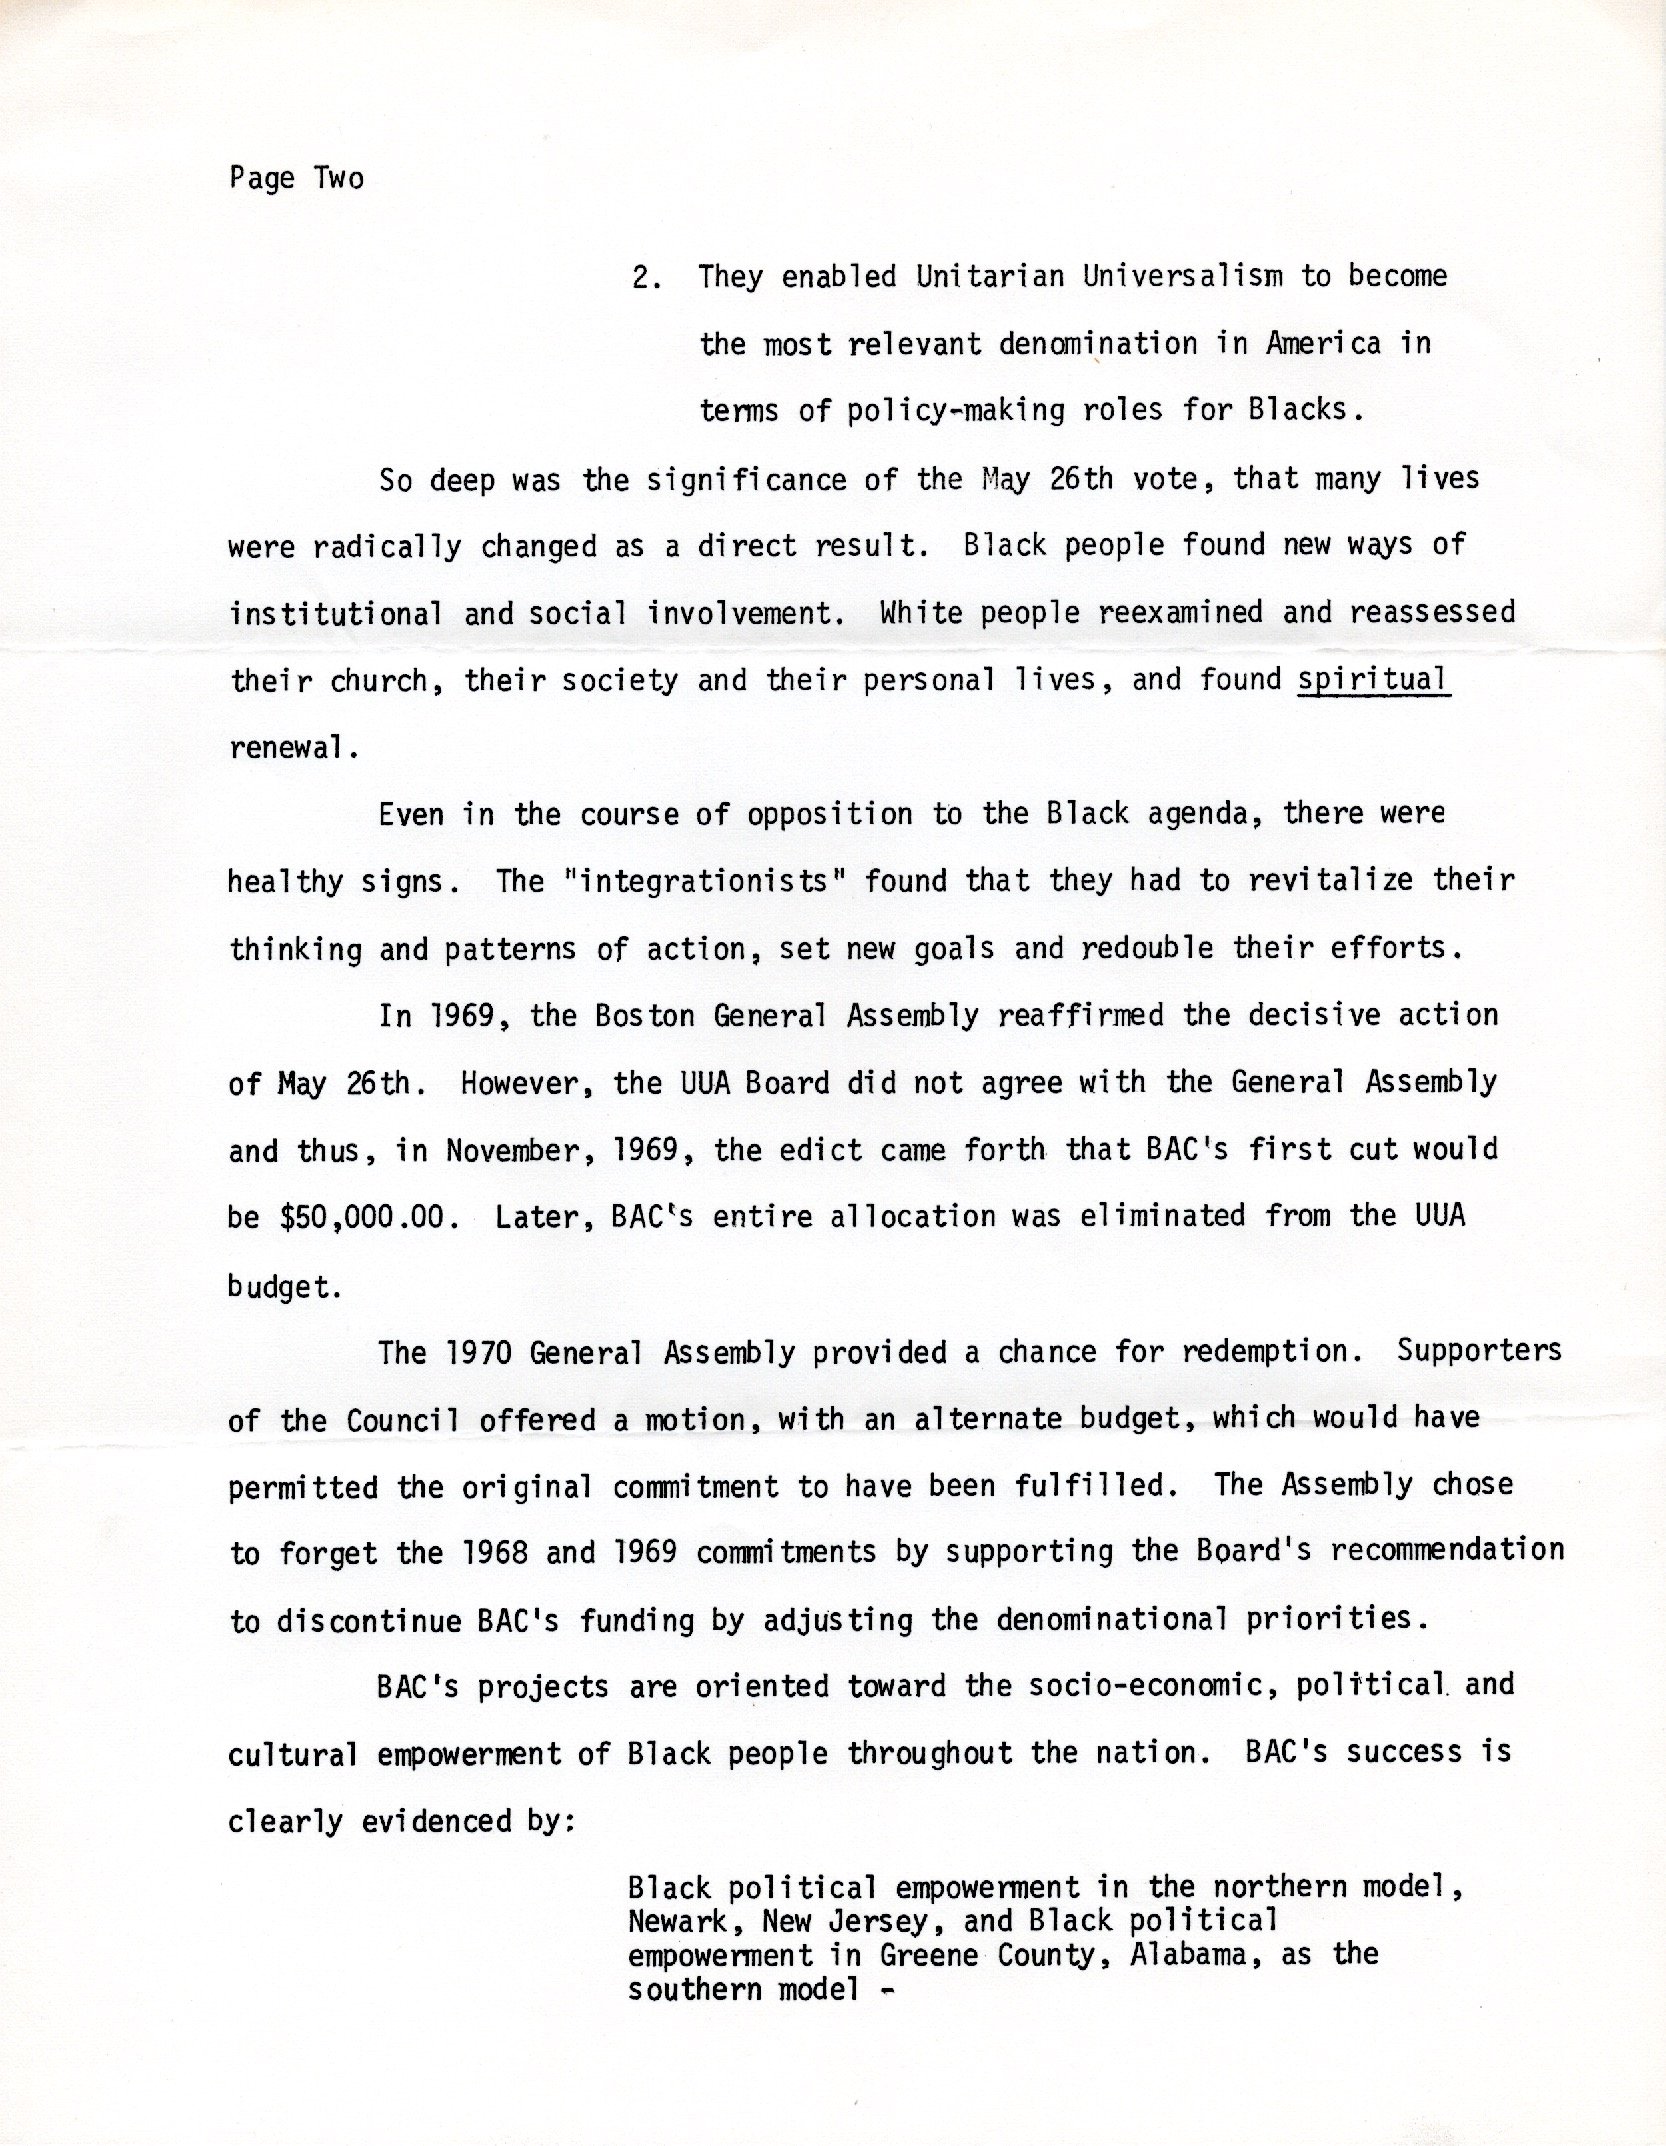 1970.8.19 Letter from Don McKinney to Fritchman re May 26 fund_0002.jpg